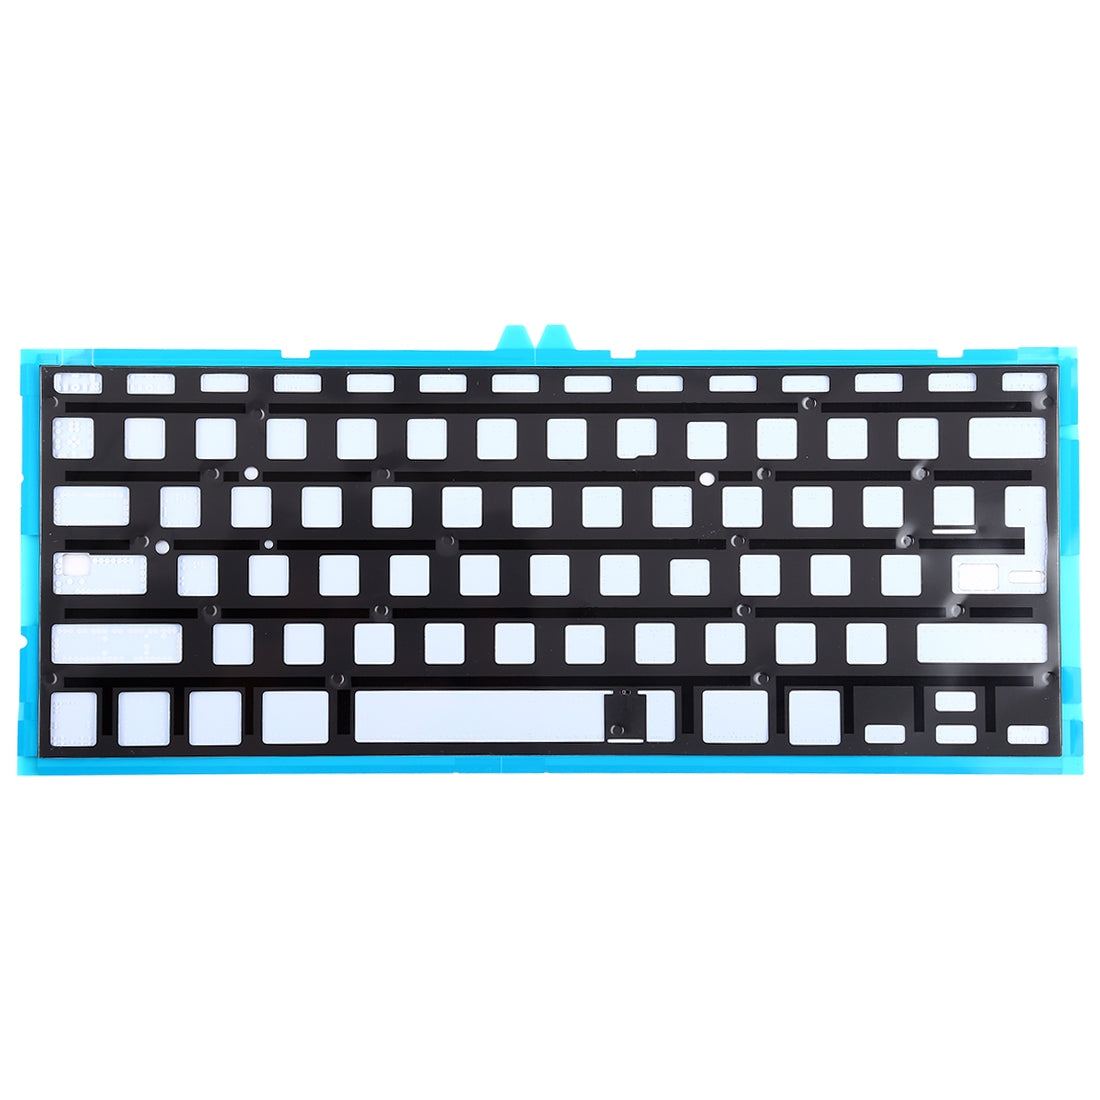 Backlight Keyboard UK Version without ñ MacBook Air 13.3 A1369 2011 2015